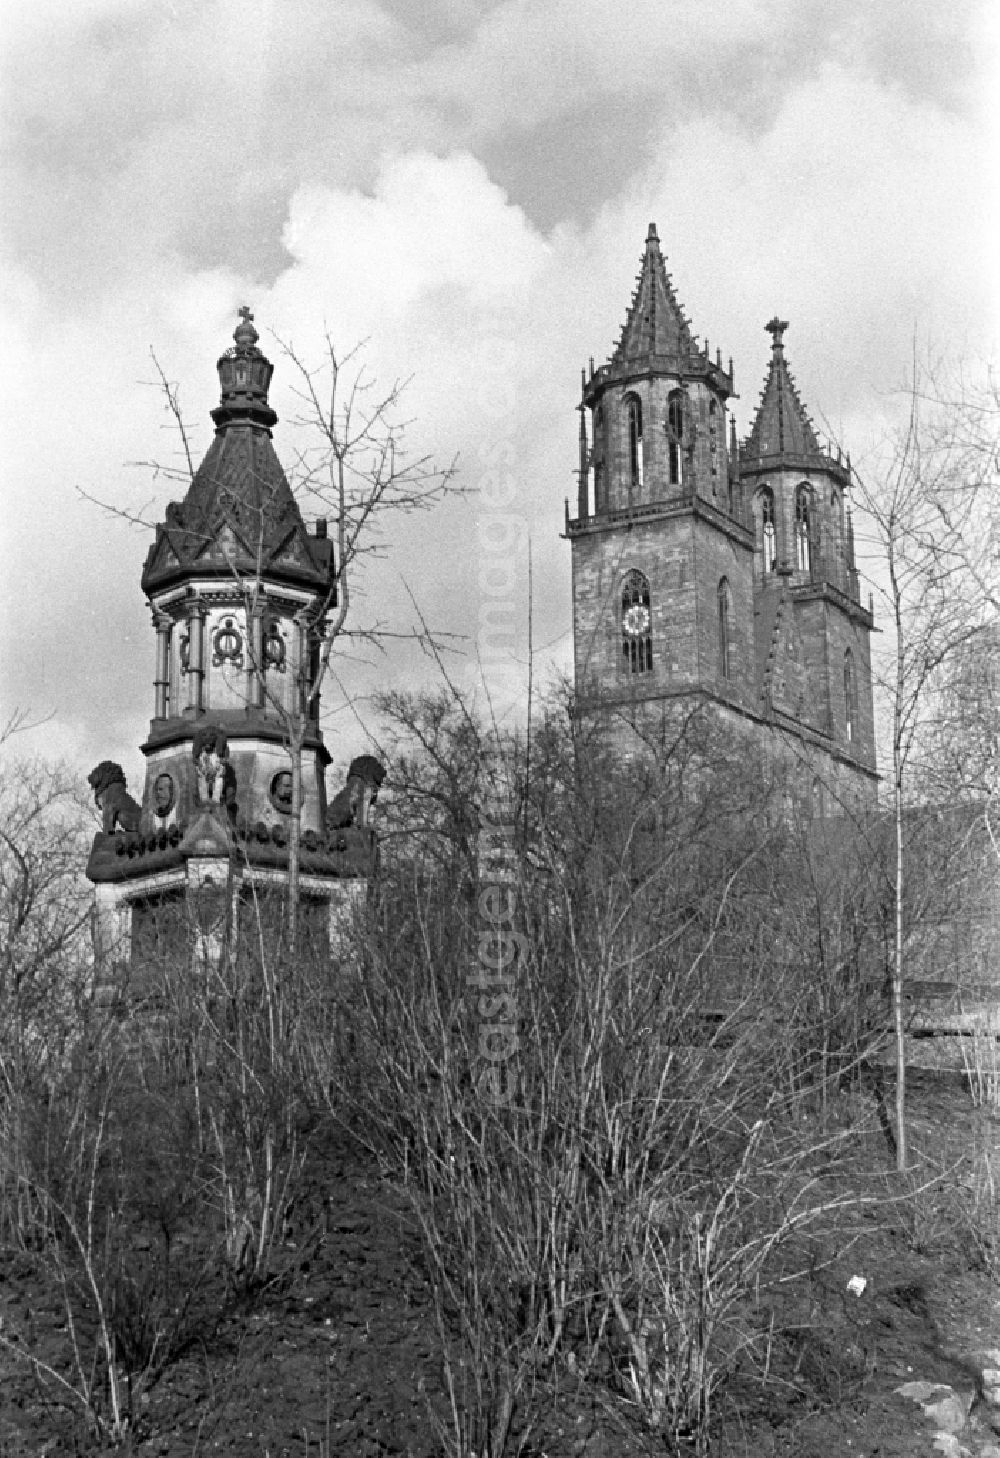 GDR photo archive: Magdeburg - The St. John's church is a church building in the Old Town district of Magdeburg. It is used as a ballroom and concert hall in the city of Magdeburg